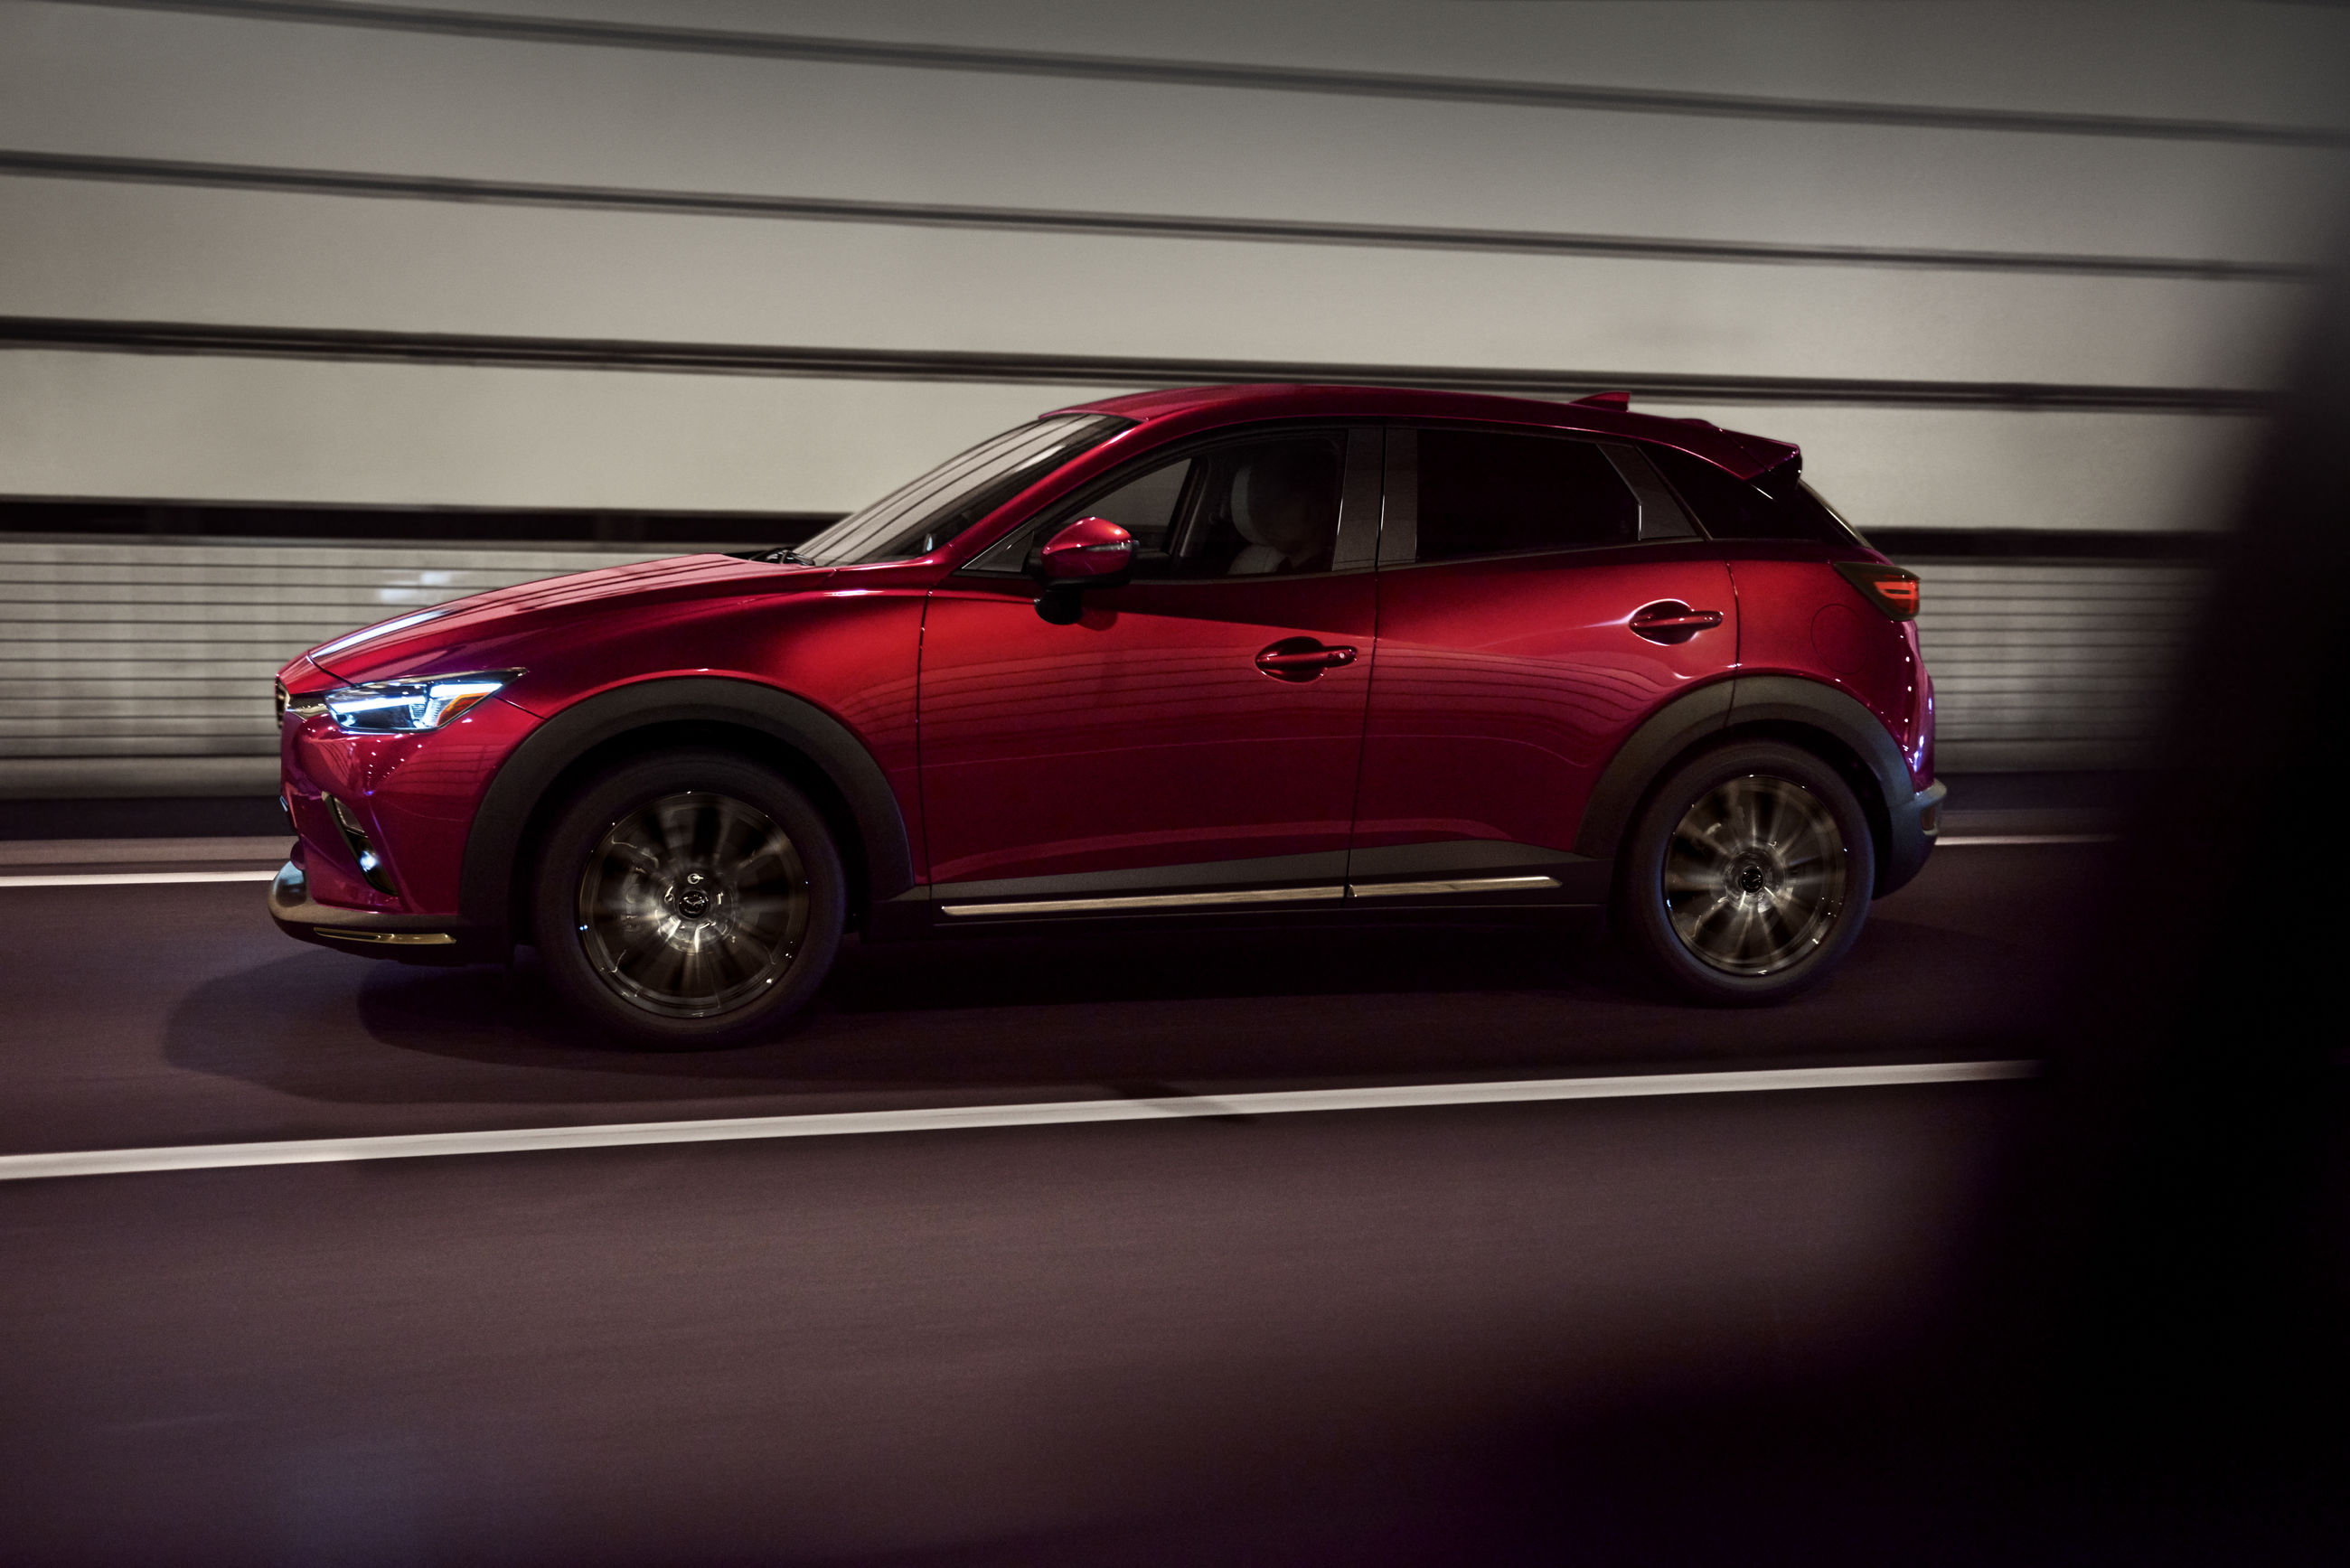 Consumer Reports Says Mazda Is the Most Reliable Mainstream Auto Brand On The Market In 2019